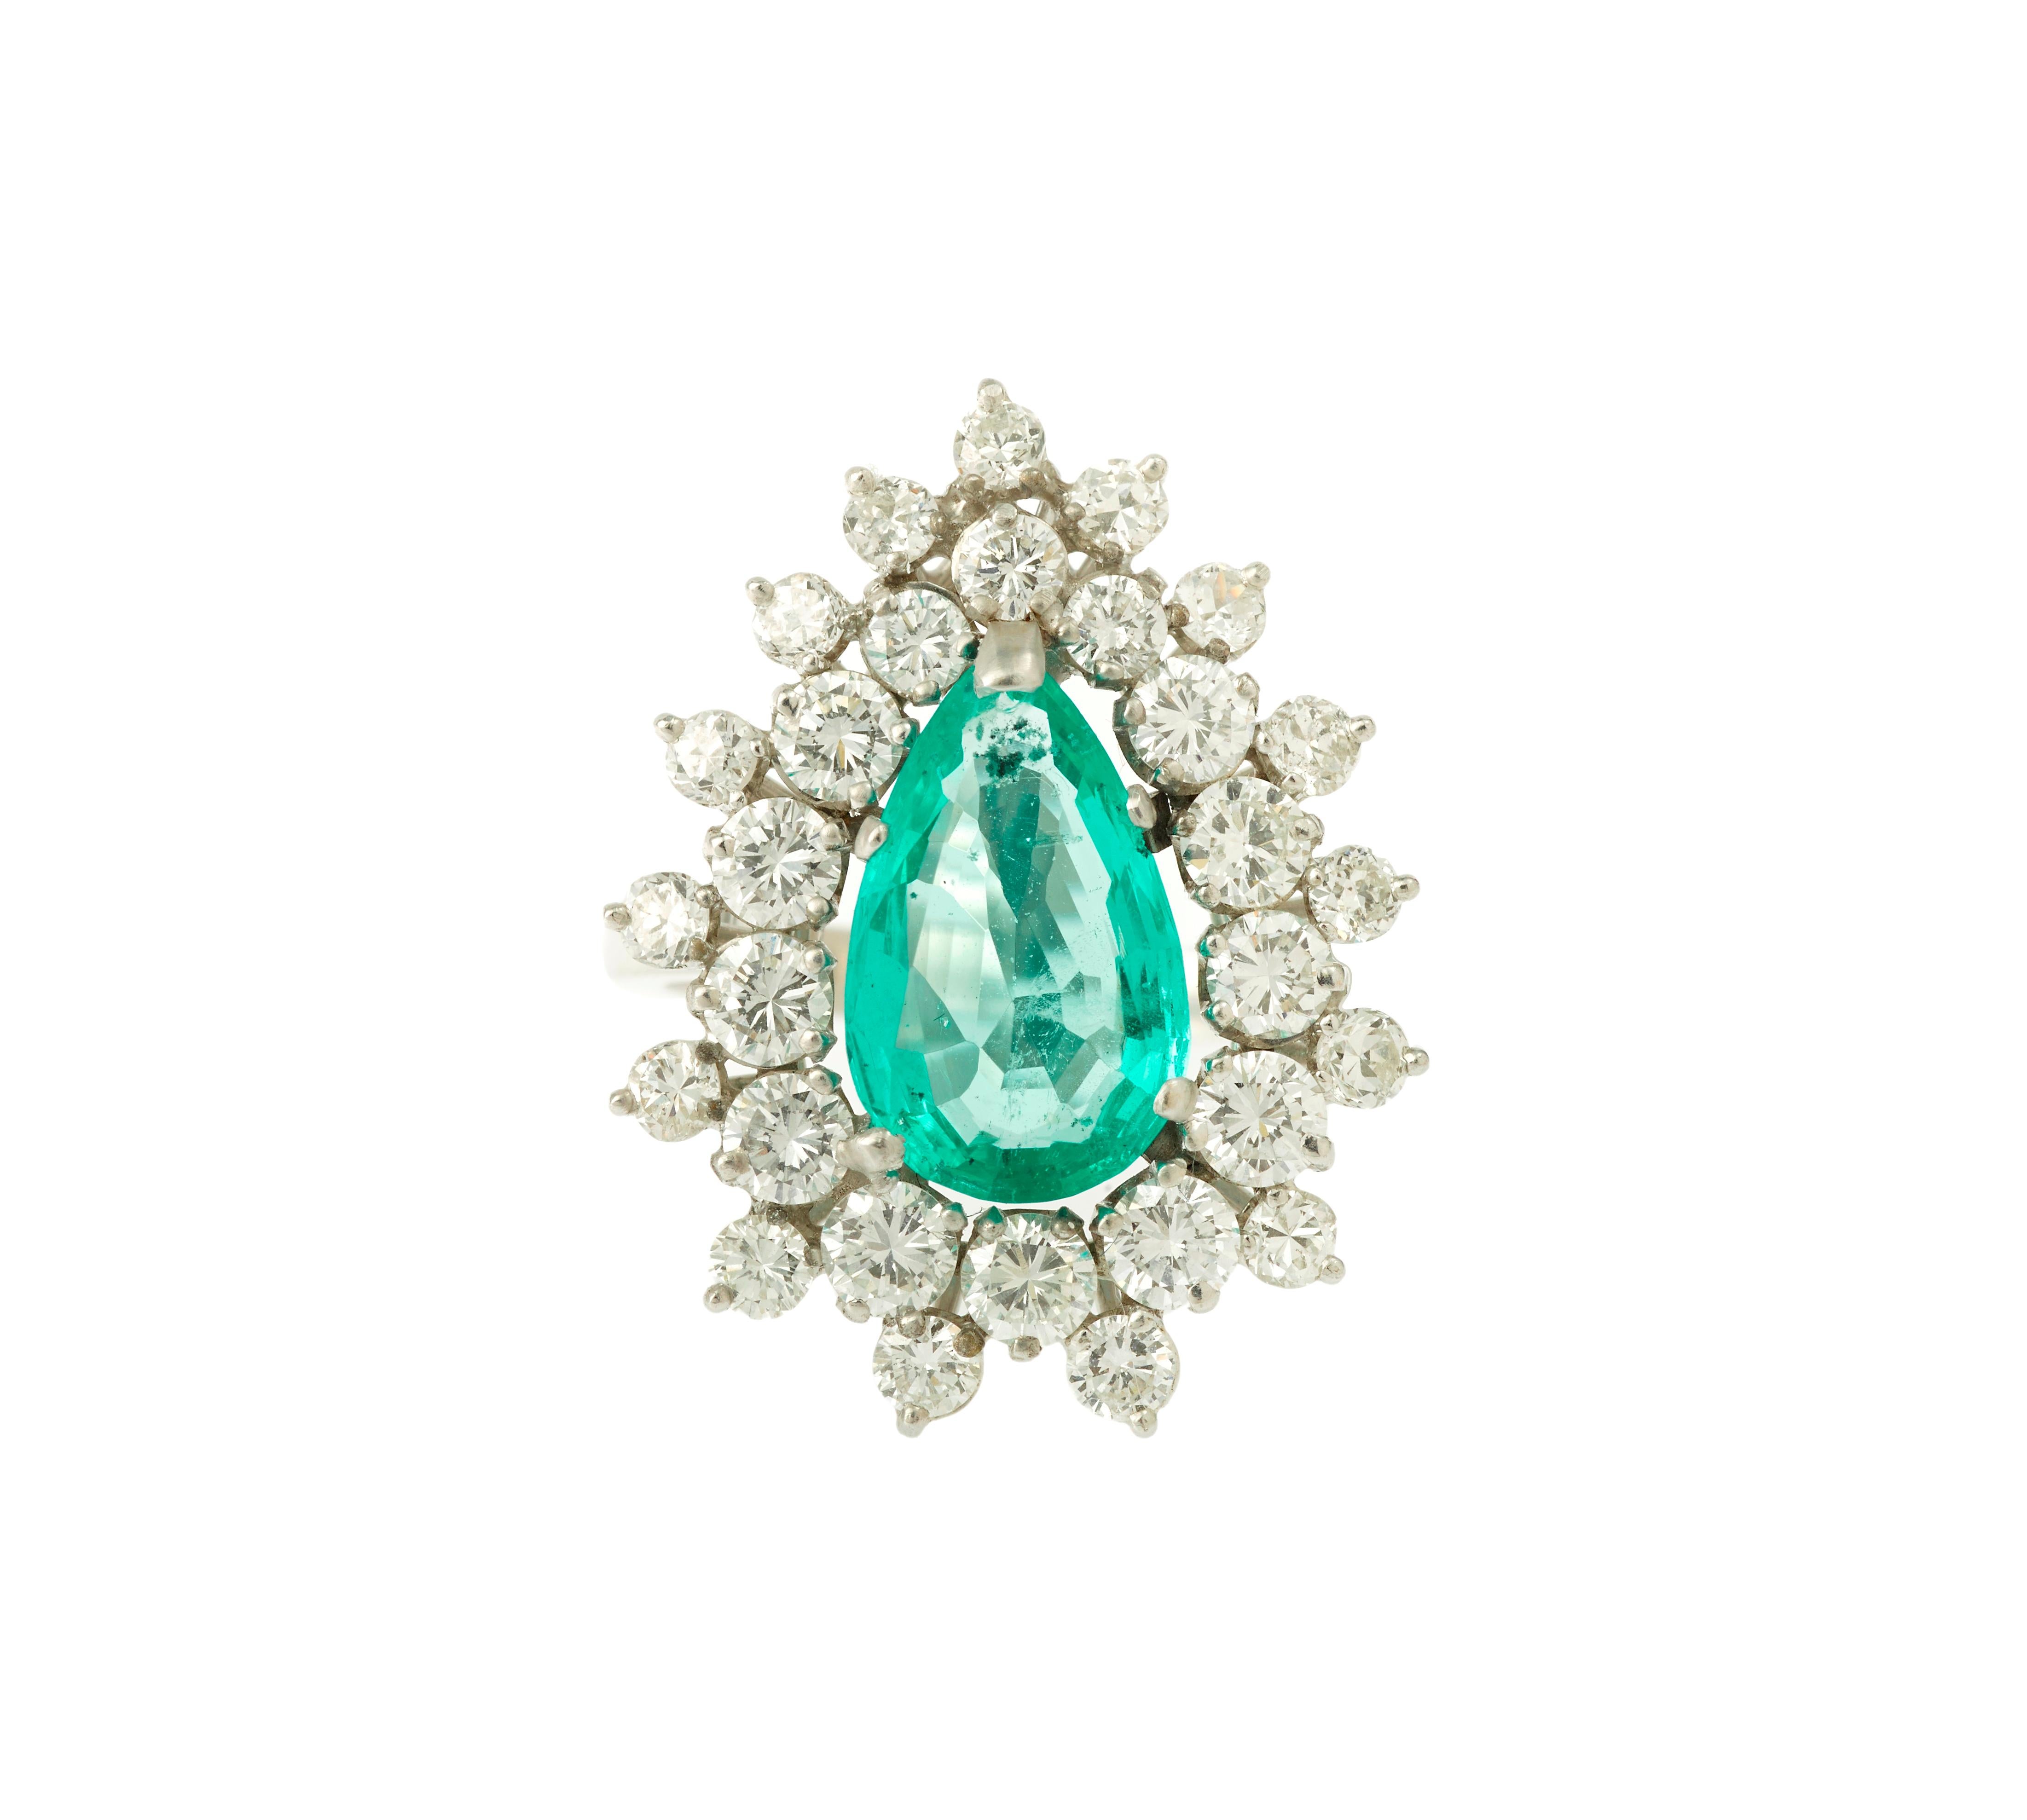 Exceptional Cocktail Ring with a central pear emerald surrounded by two rows of 29 diamonds.

Approx weight of the central emerald: 2.80 carats
Pear size
Color: light green
Very cristaline

Weight of 29 diamonds: 2.45 carats
Cut: round
Color: H /